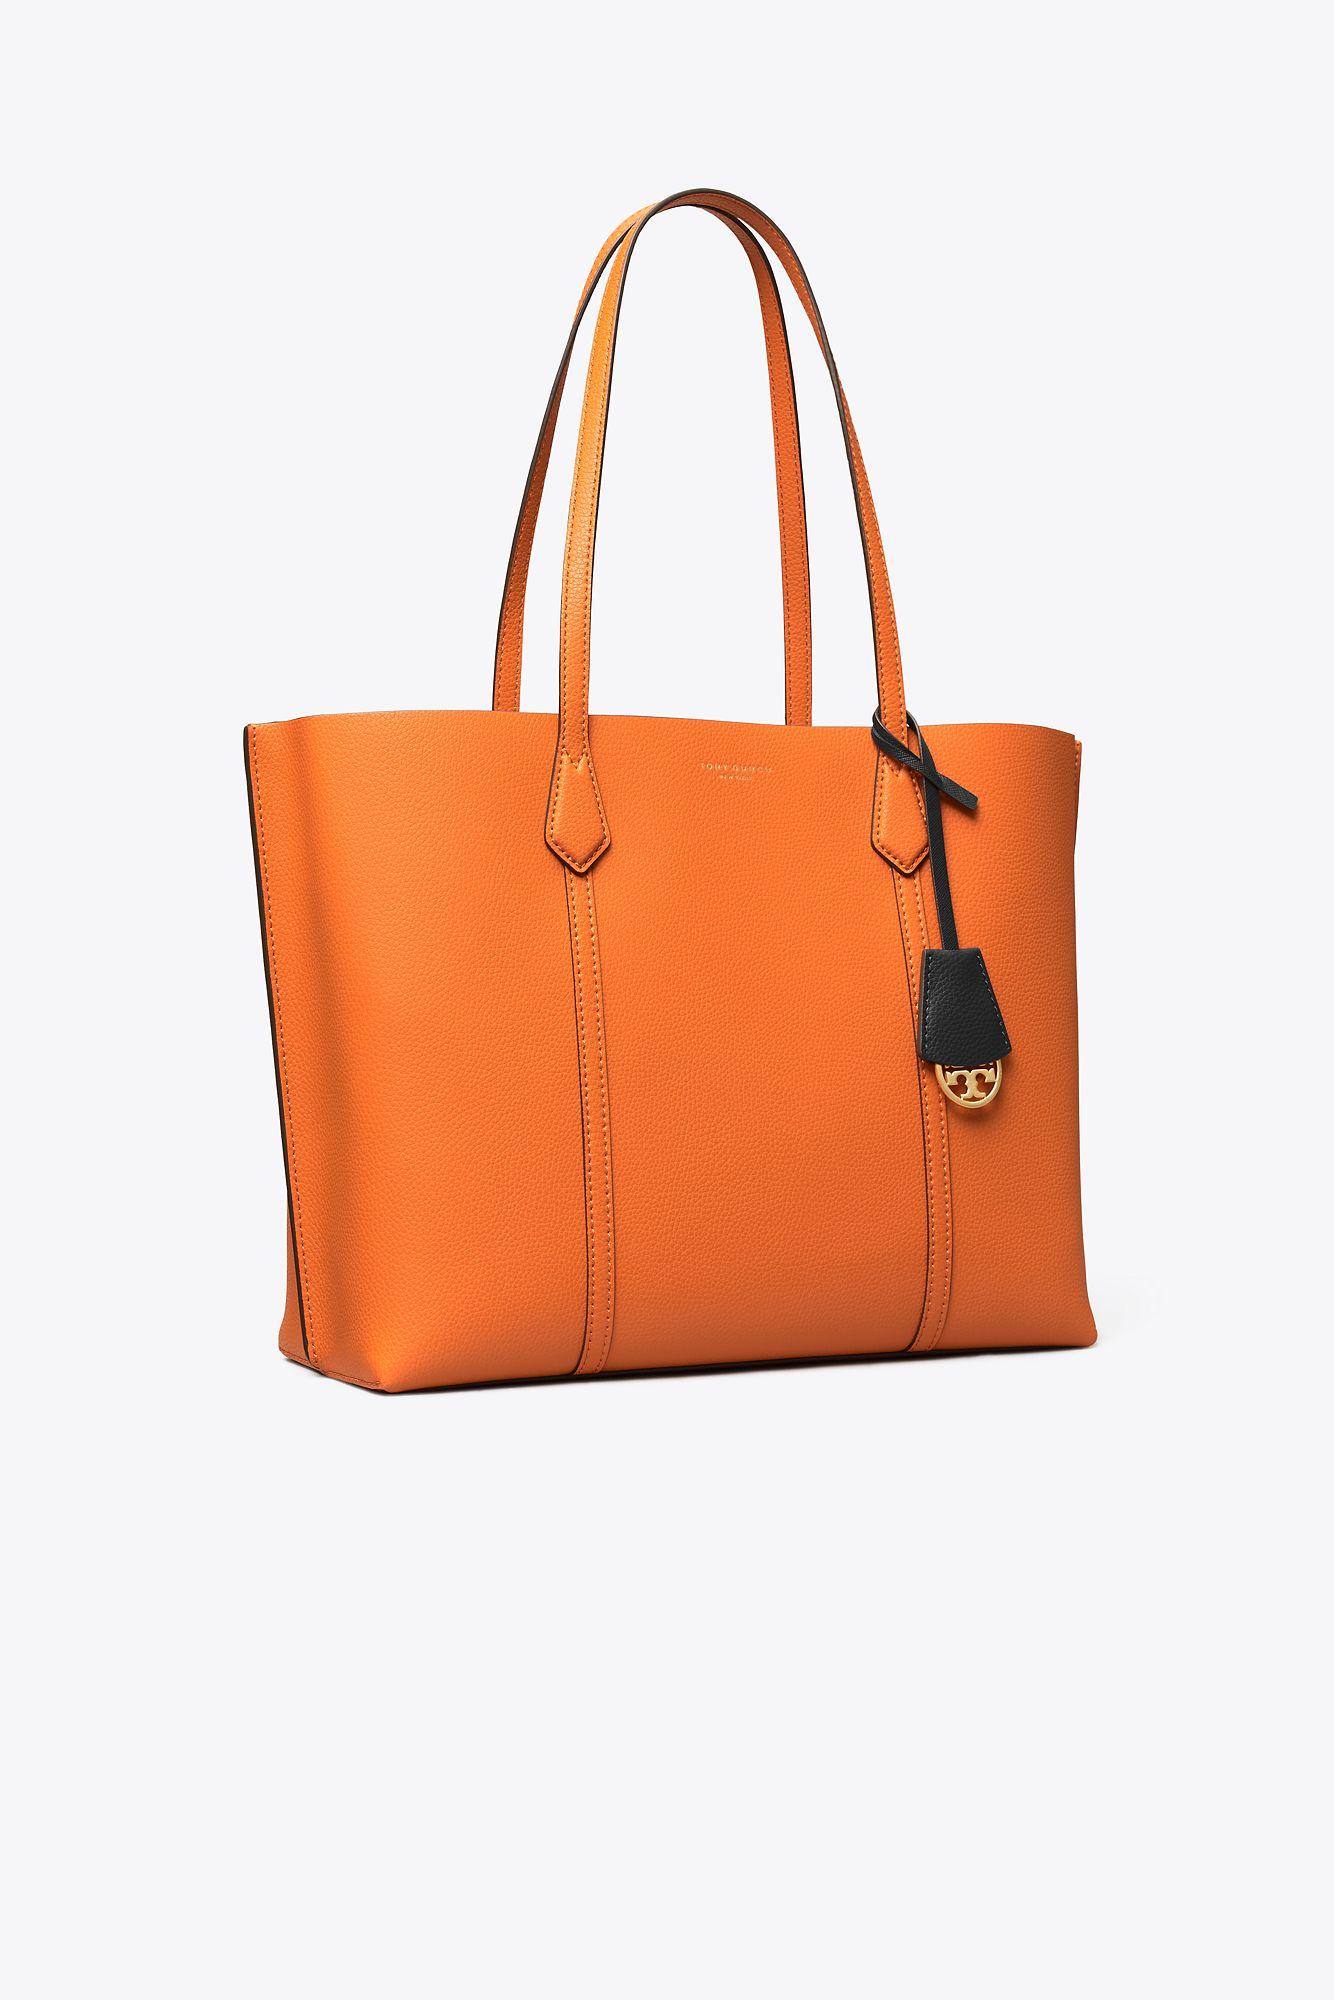 Tory Burch Perry Leather Tote Bag in Orange